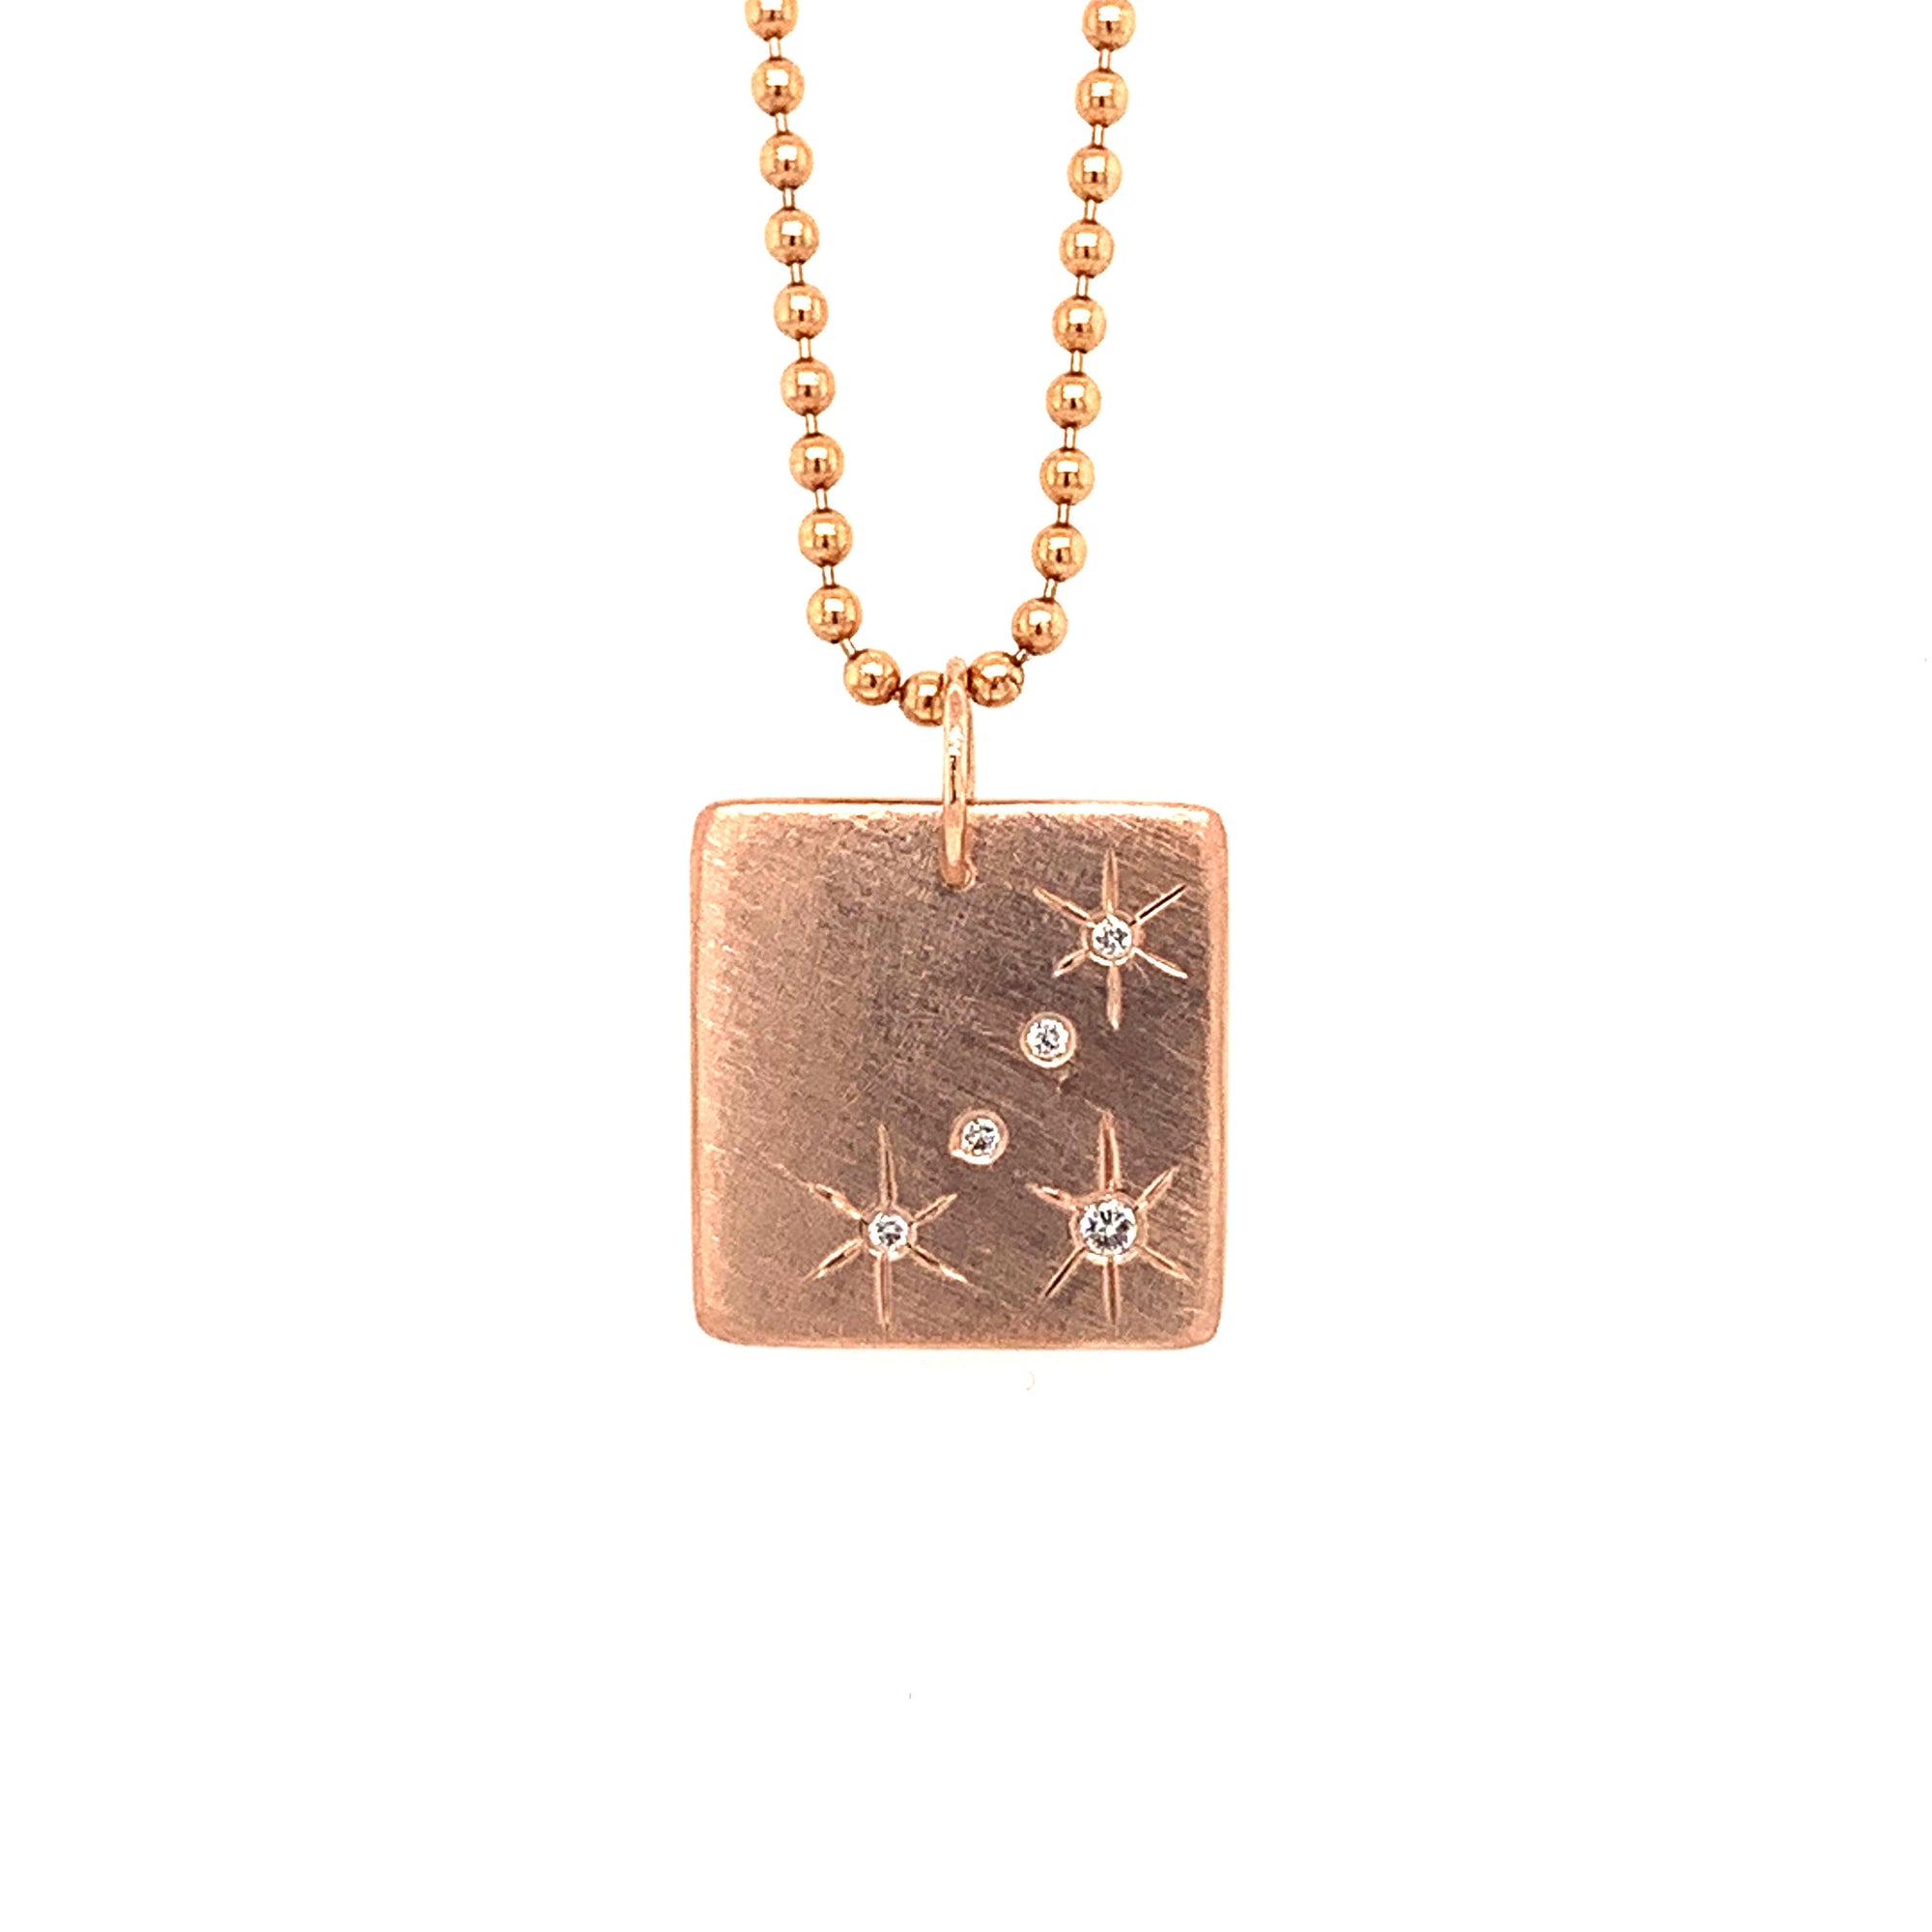 14k rose gold small MORU square charm with diamonds and starburst etching